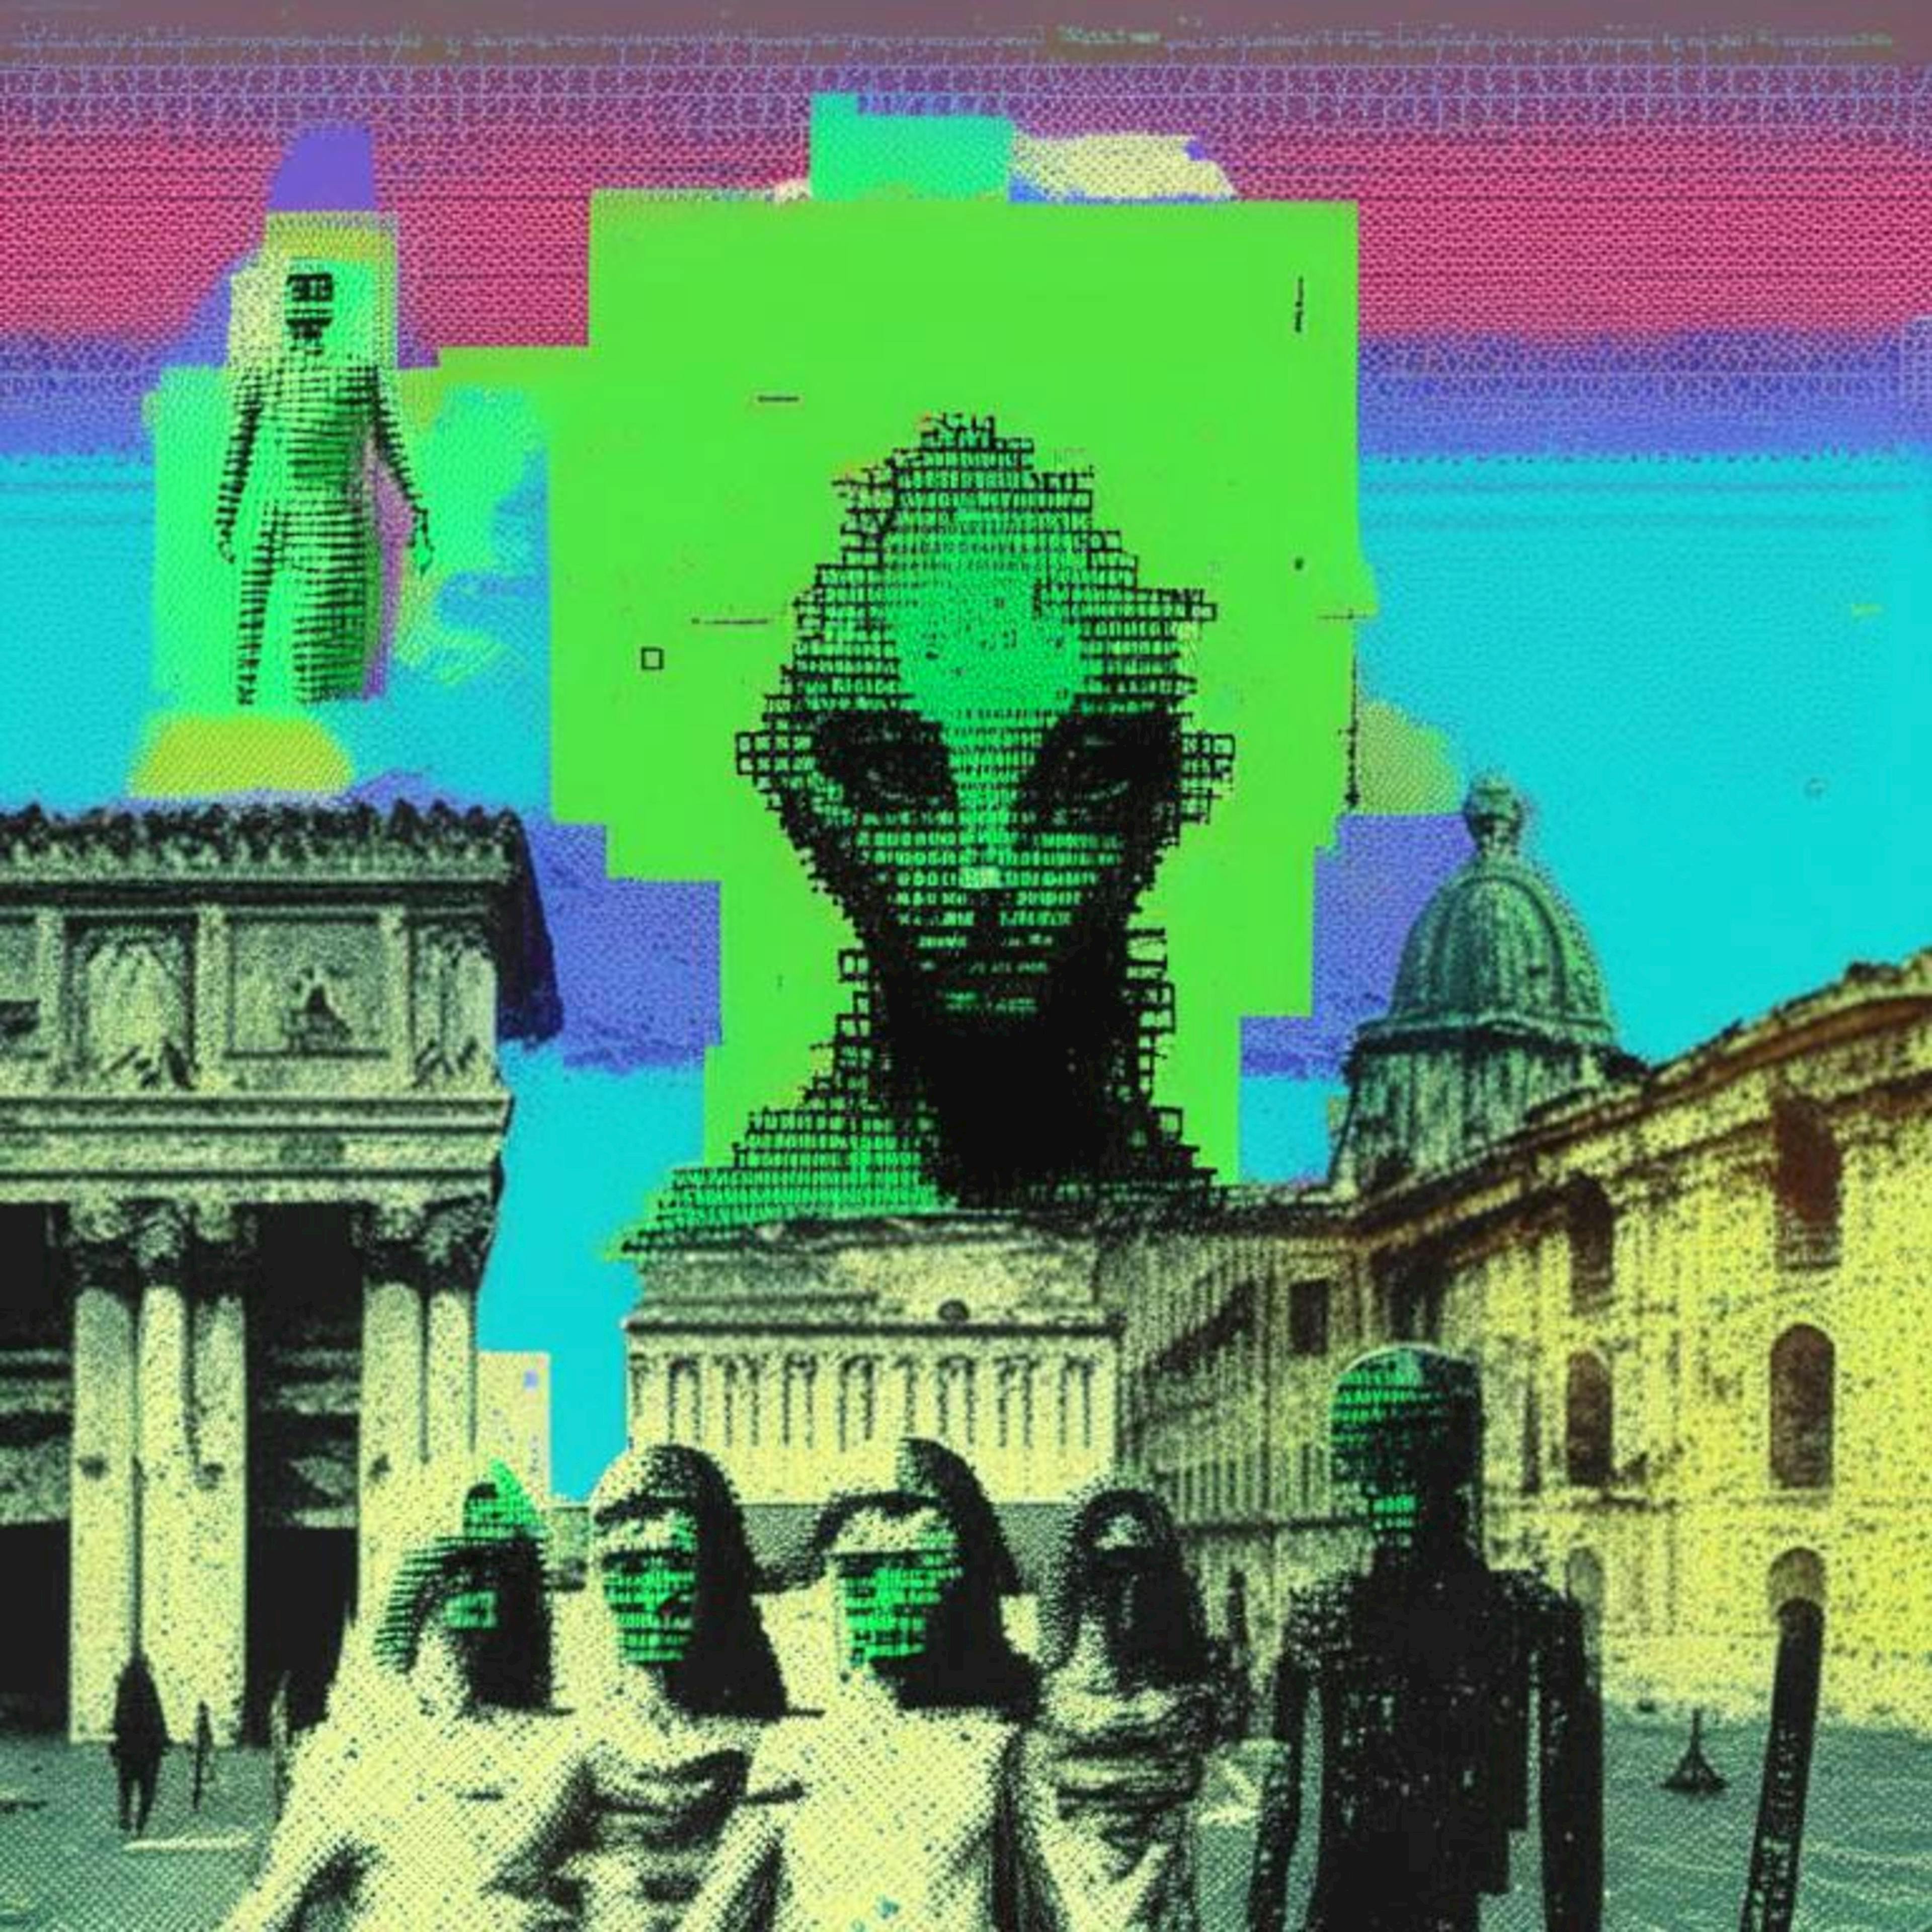 EXTRATERRESTRIAL GUESTS IN ROME IV